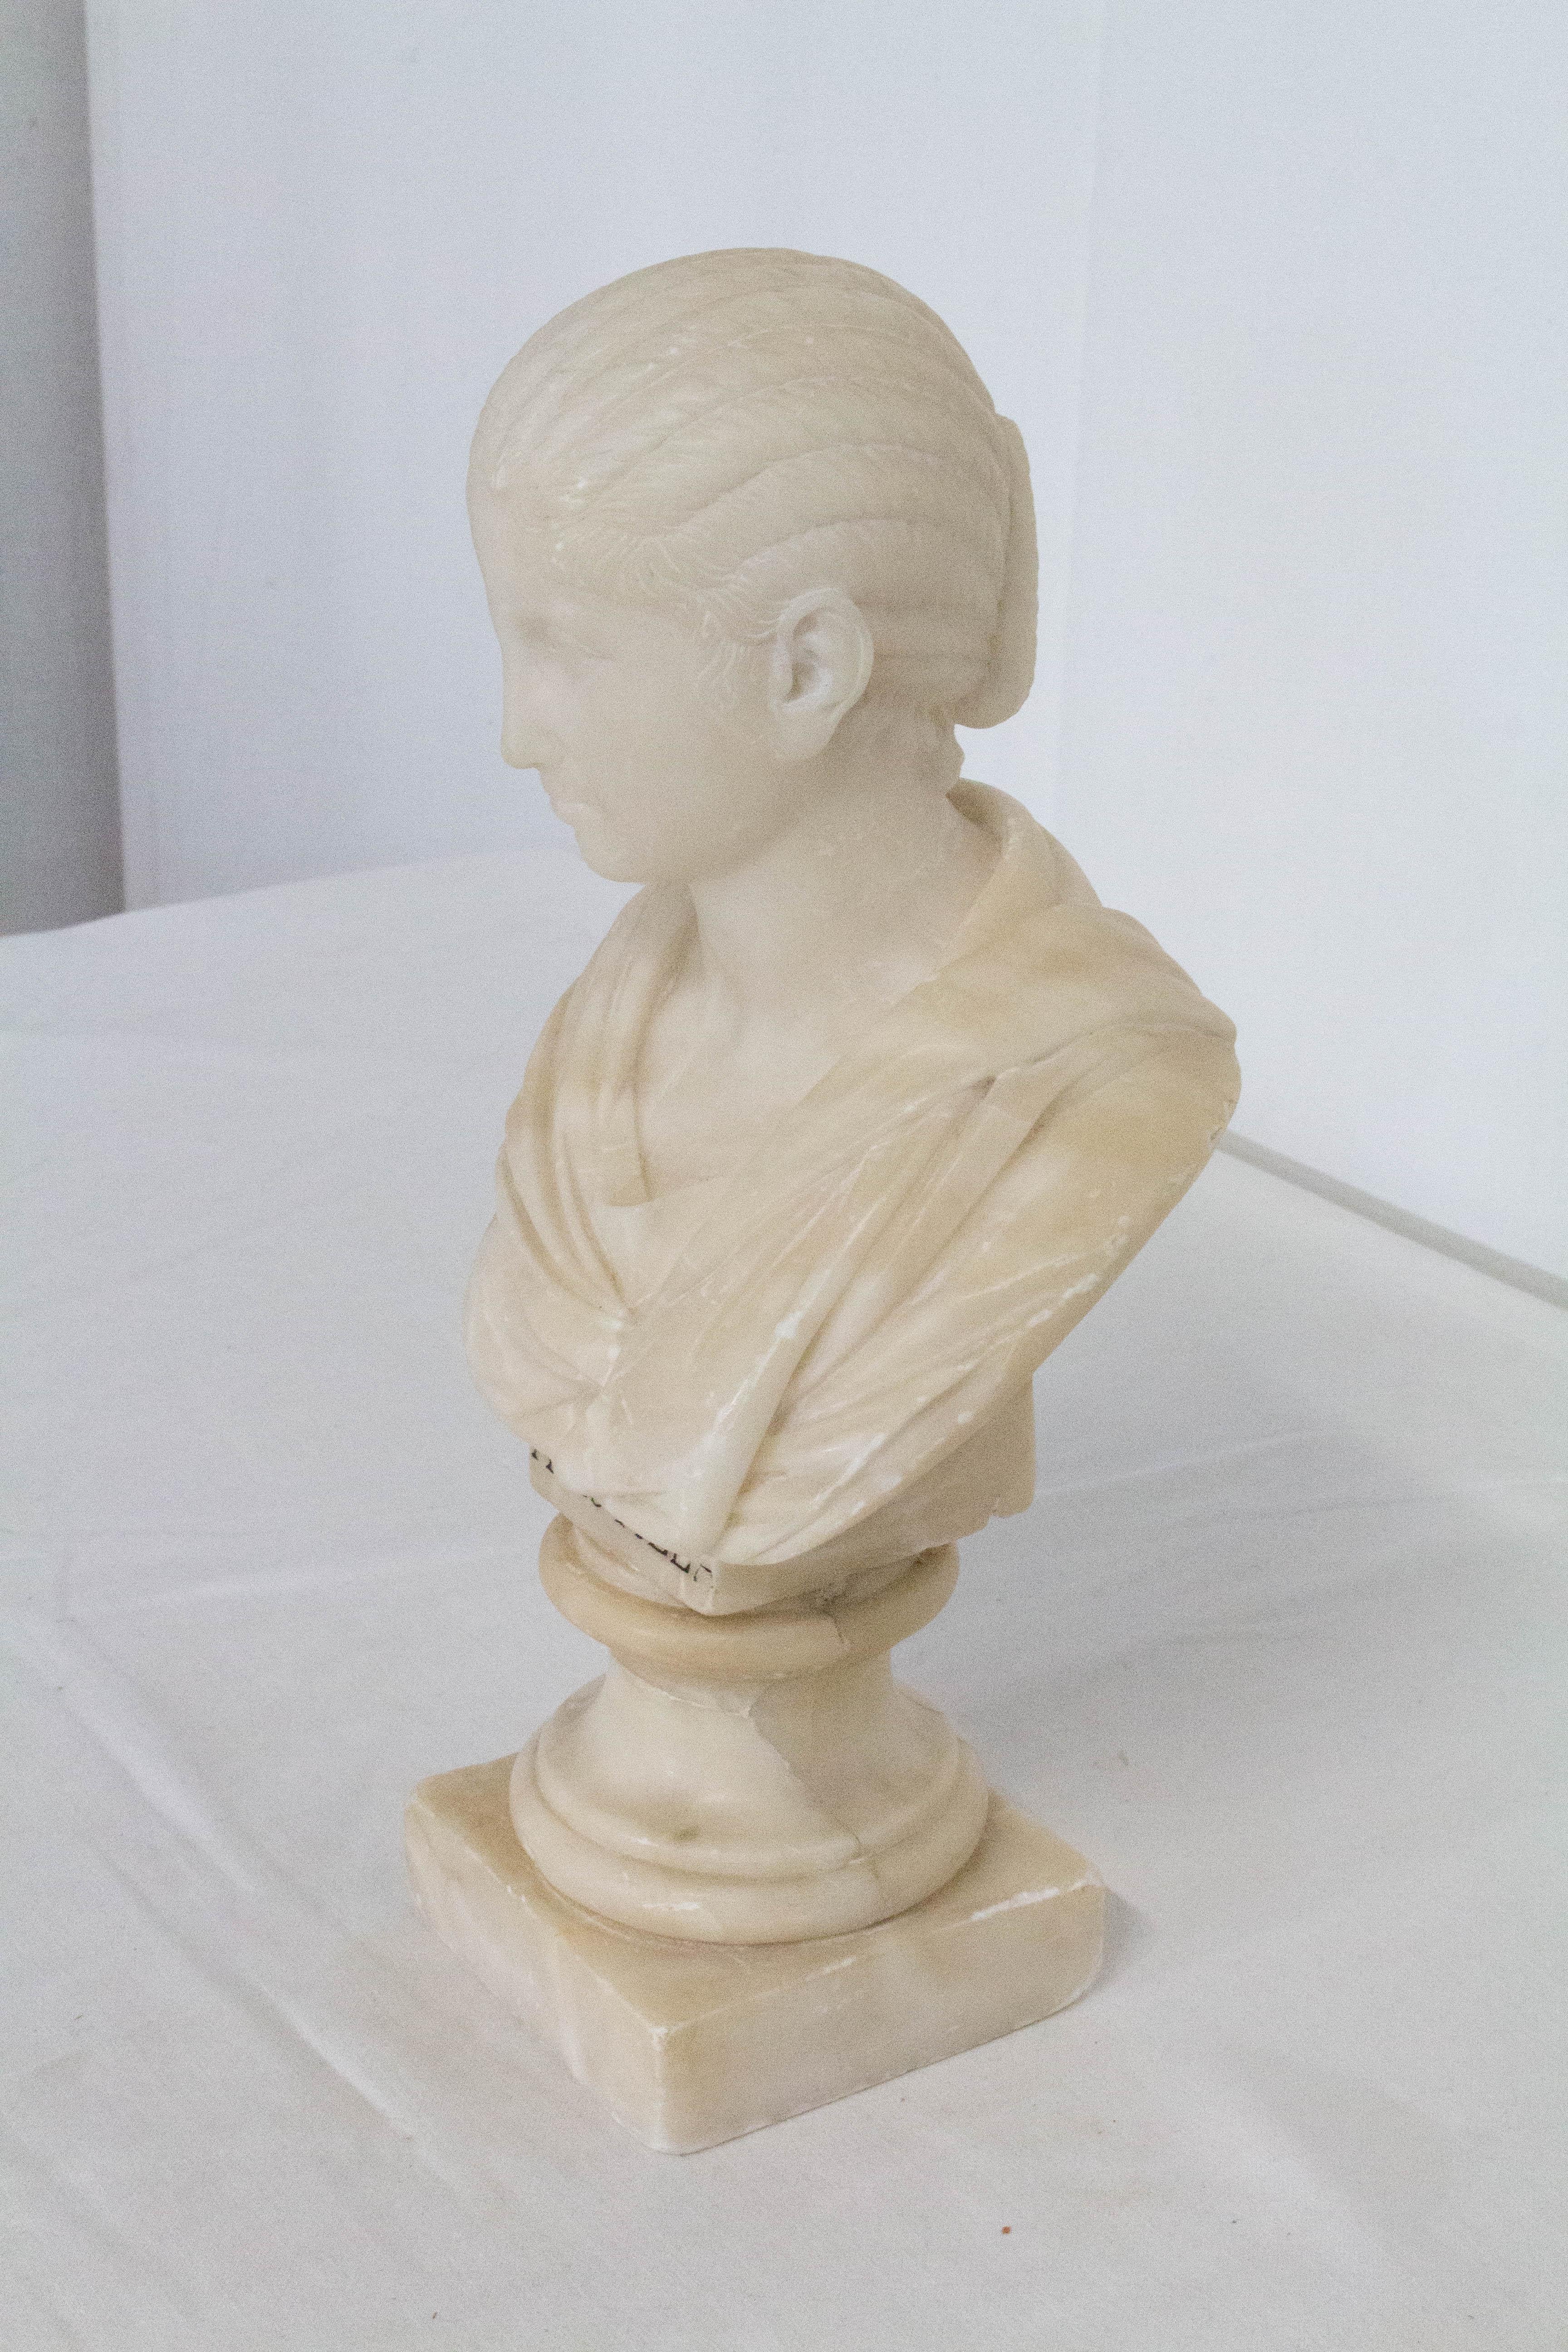 Carved Art Deco Albaster Plautilla Bust Neoclassic, Early 20th Century For Sale